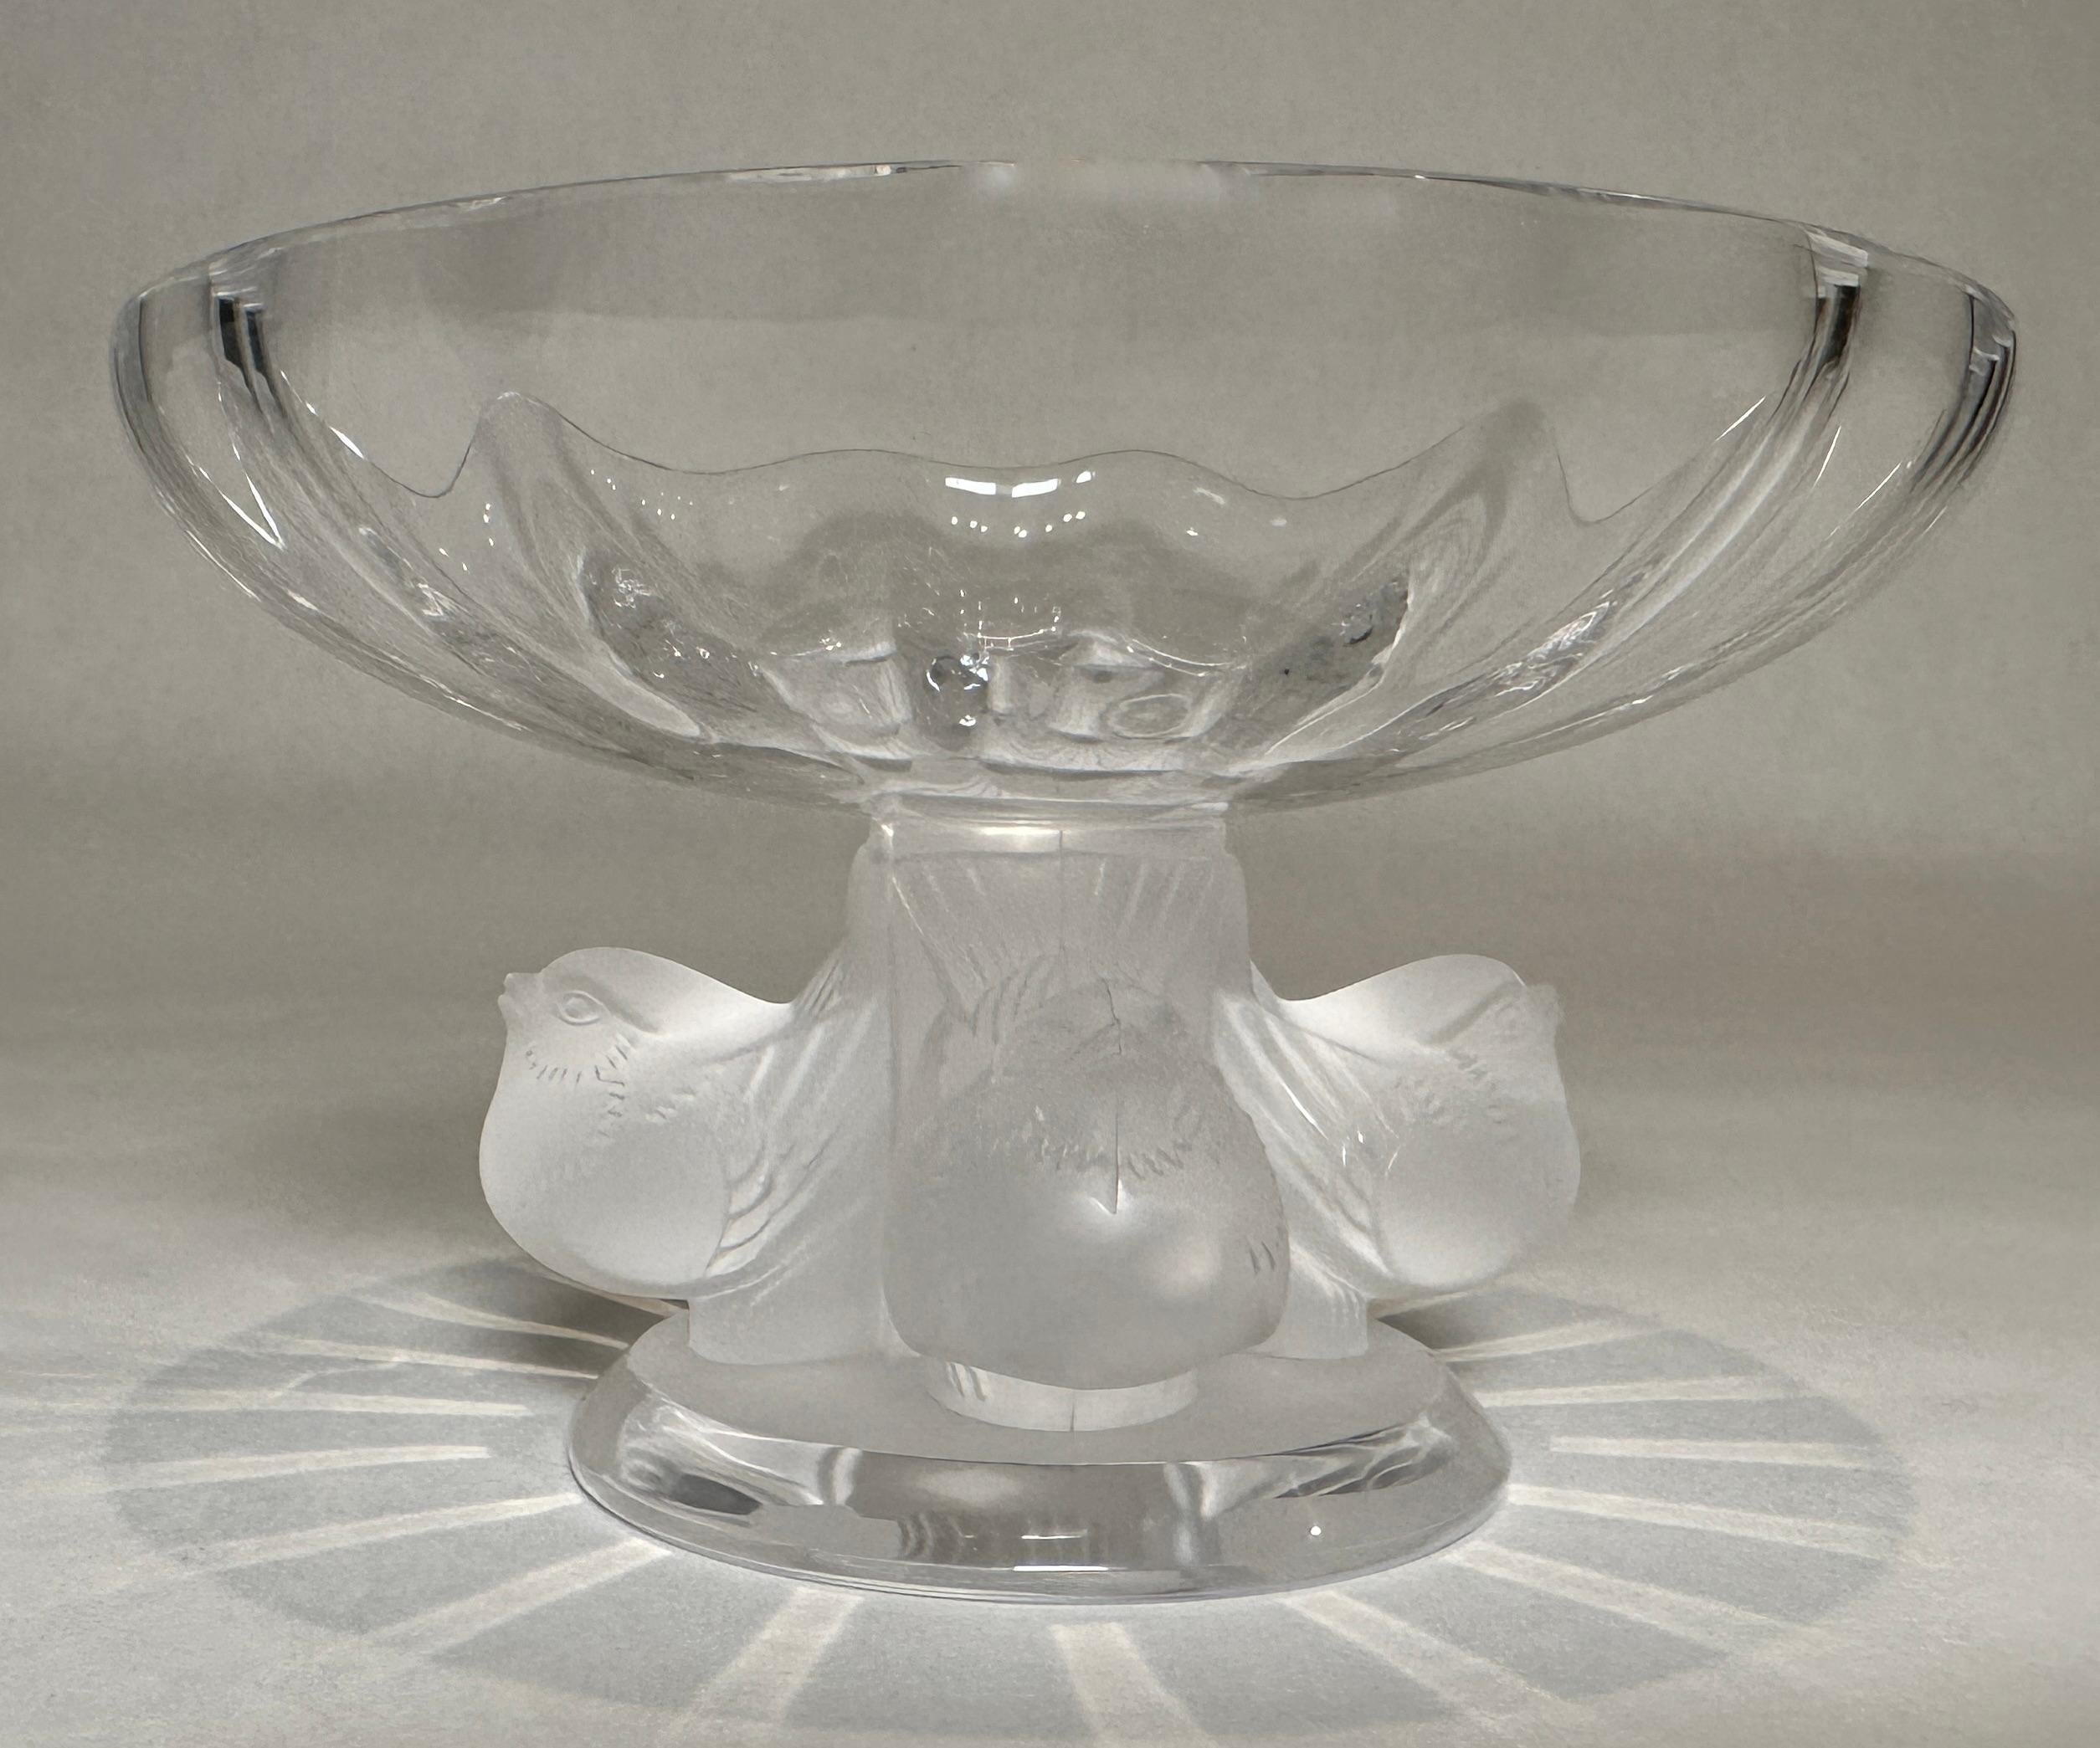 Lalique compote Nogent bowl. Signed on bottom.
Designed by Marc Lalique in 1966, this small bowl has become a Lalique classic. The satin finish on the birds contrasts with the transparency of the bowl while the purity of crystal echoes the glare of